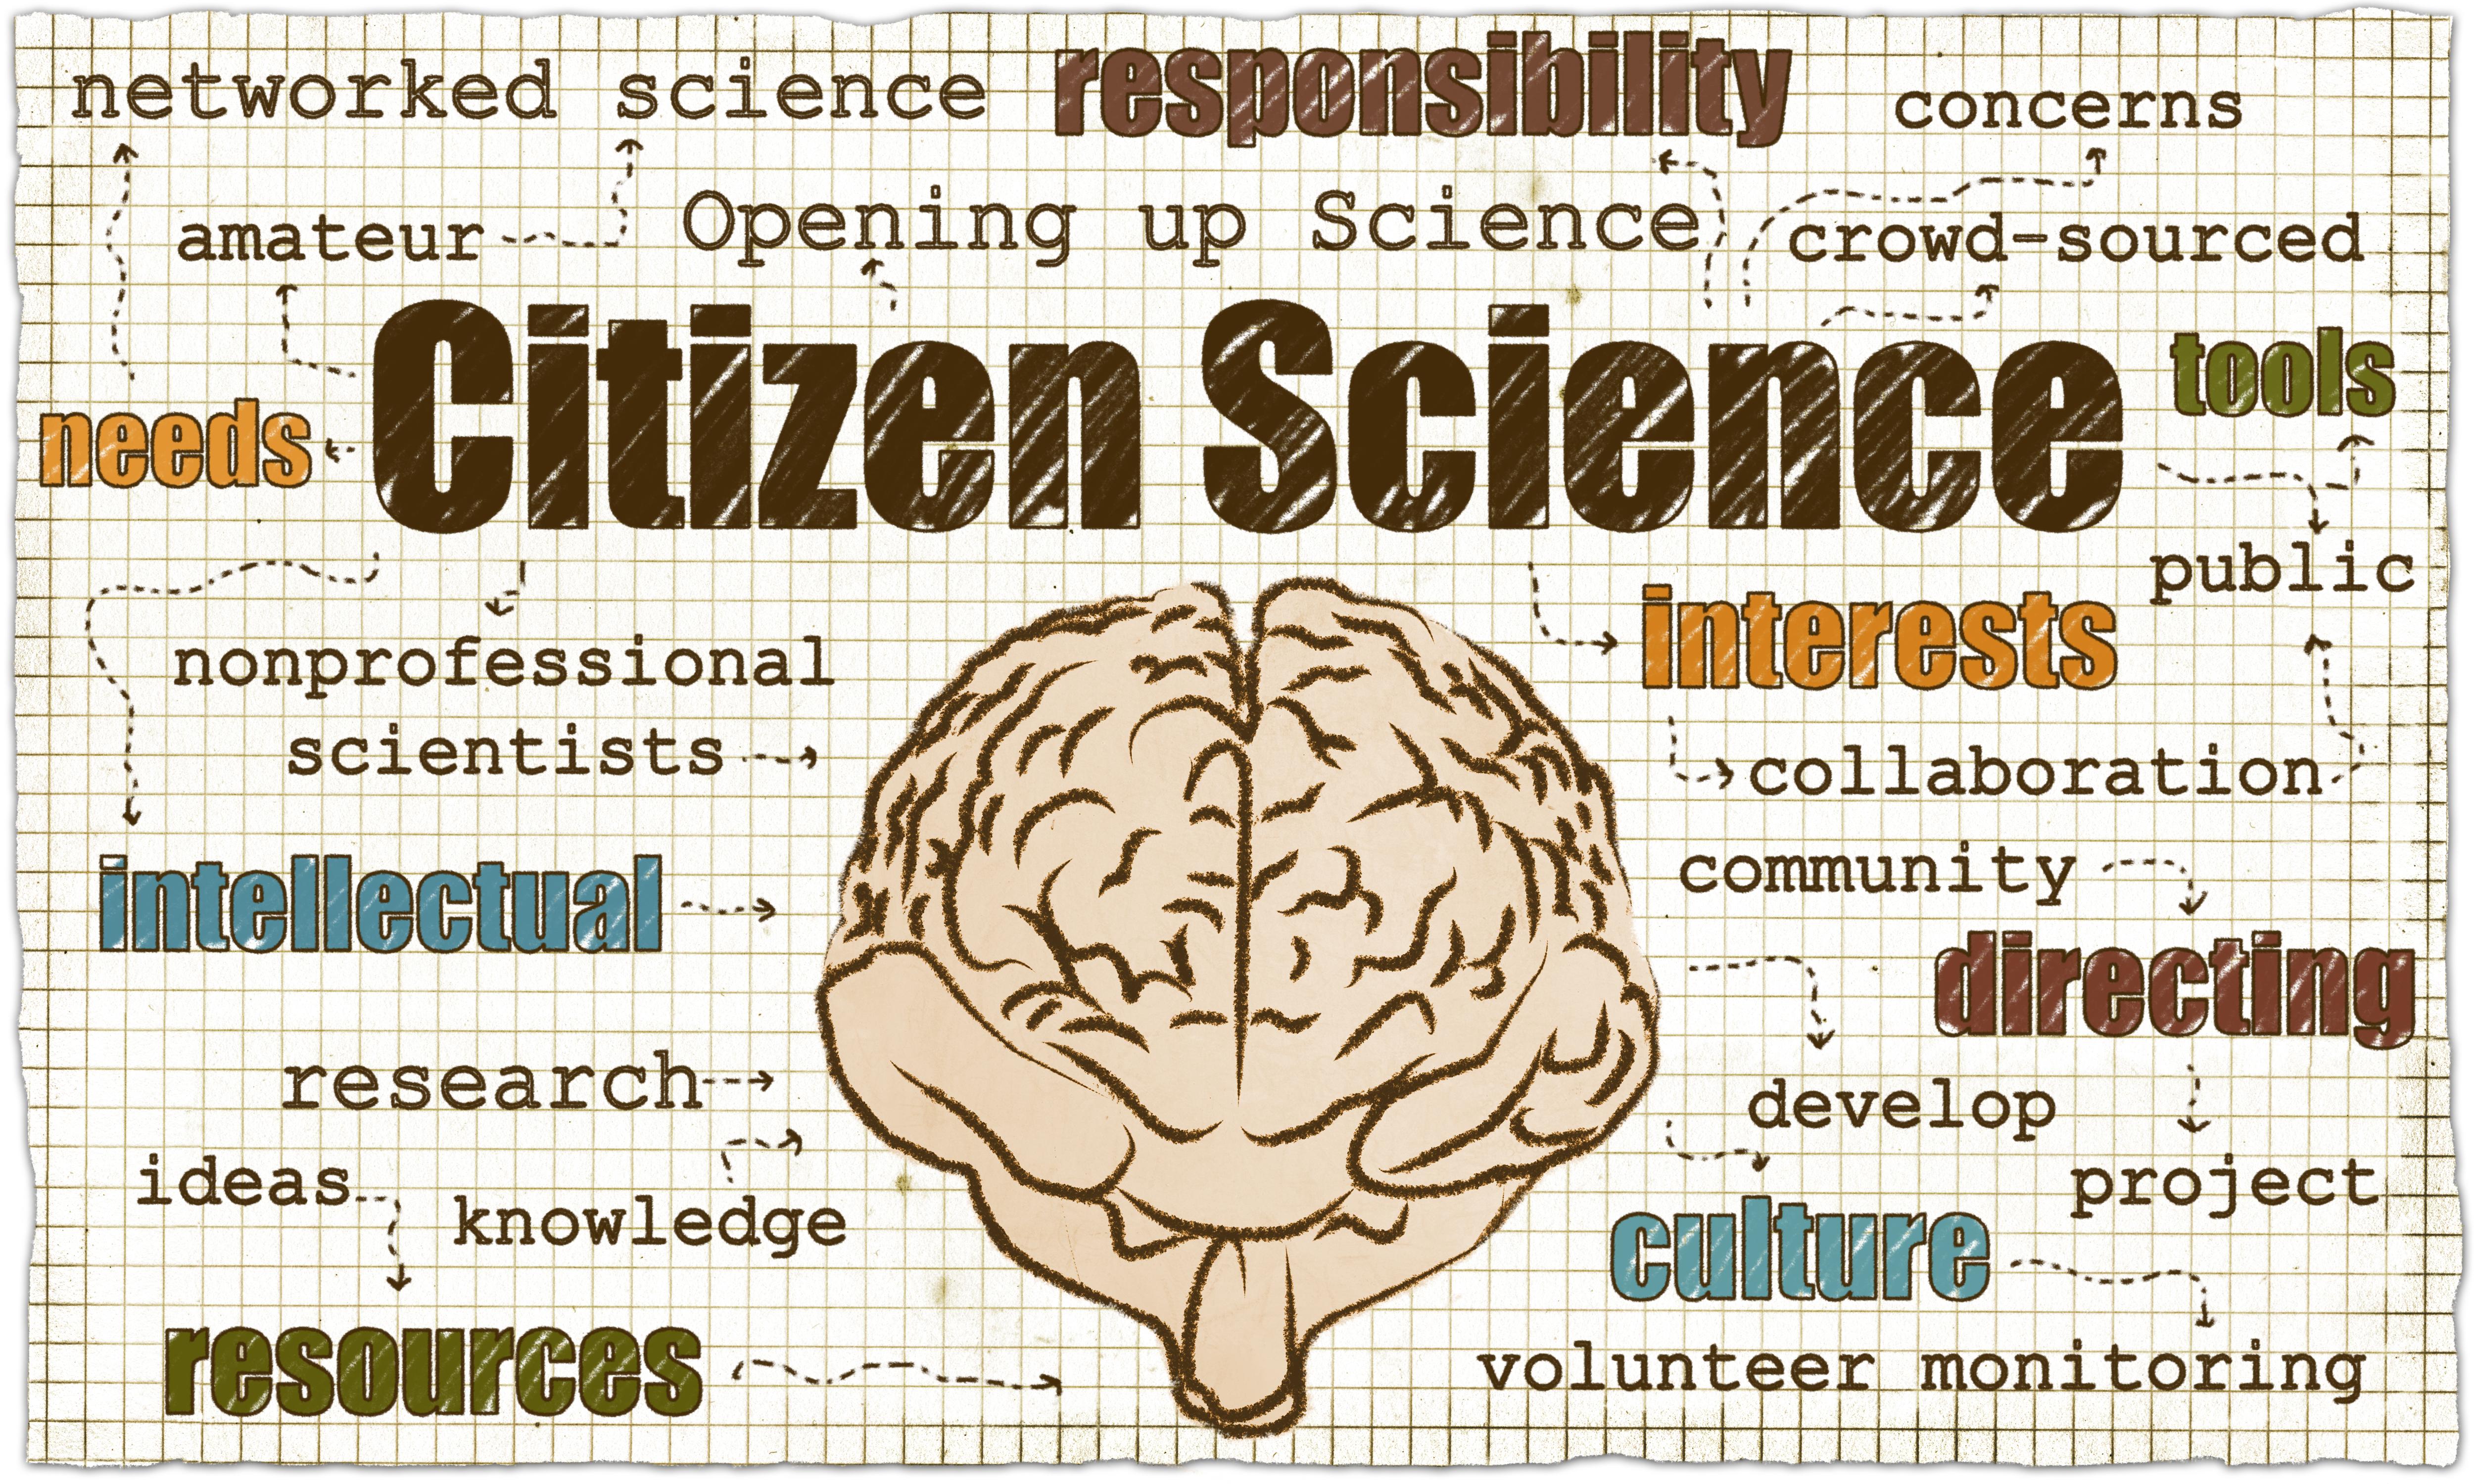 The Debate Around Citizen Science Should the Term Be Rebranded? University of Maryland School of Public Health